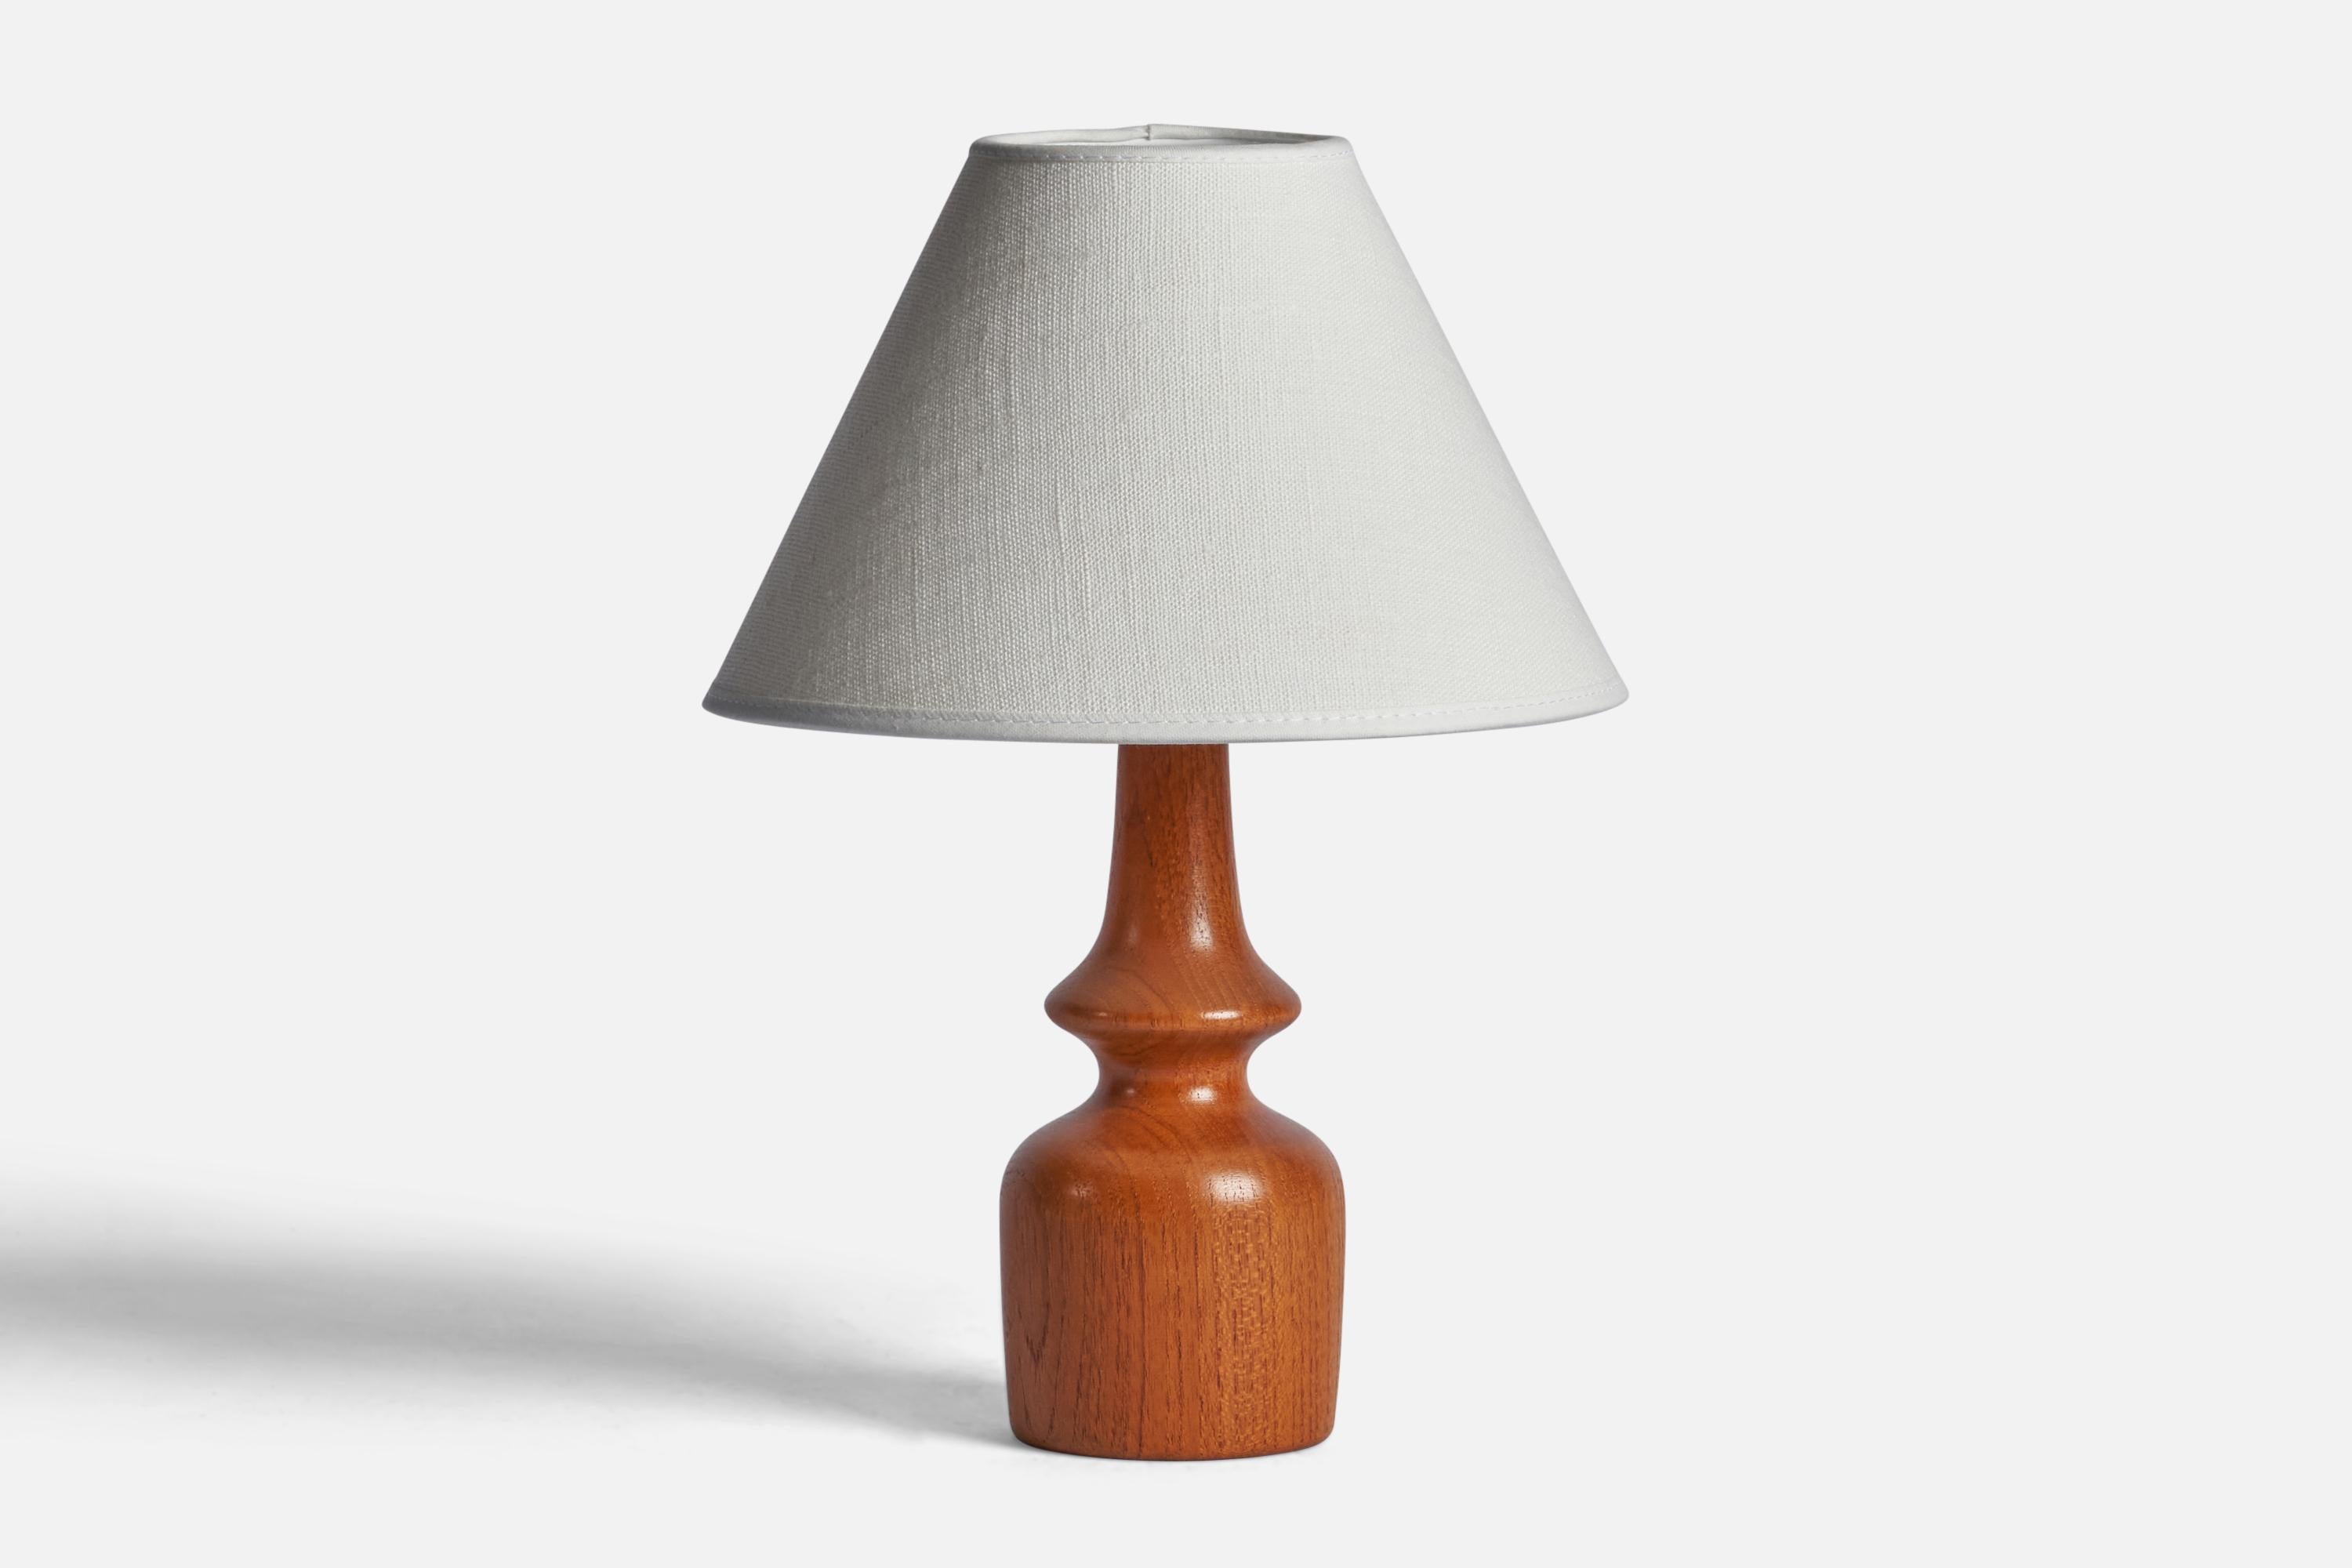 A teak table lamp designed and produced in Sweden, 1950s.

Dimensions of Lamp (inches): 8.75” H x 2.75” Diameter
Dimensions of Shade (inches): 3” Top Diameter x 8” Bottom Diameter x 5” H 
Dimensions of Lamp with Shade (inches): 11.15” H x 8”